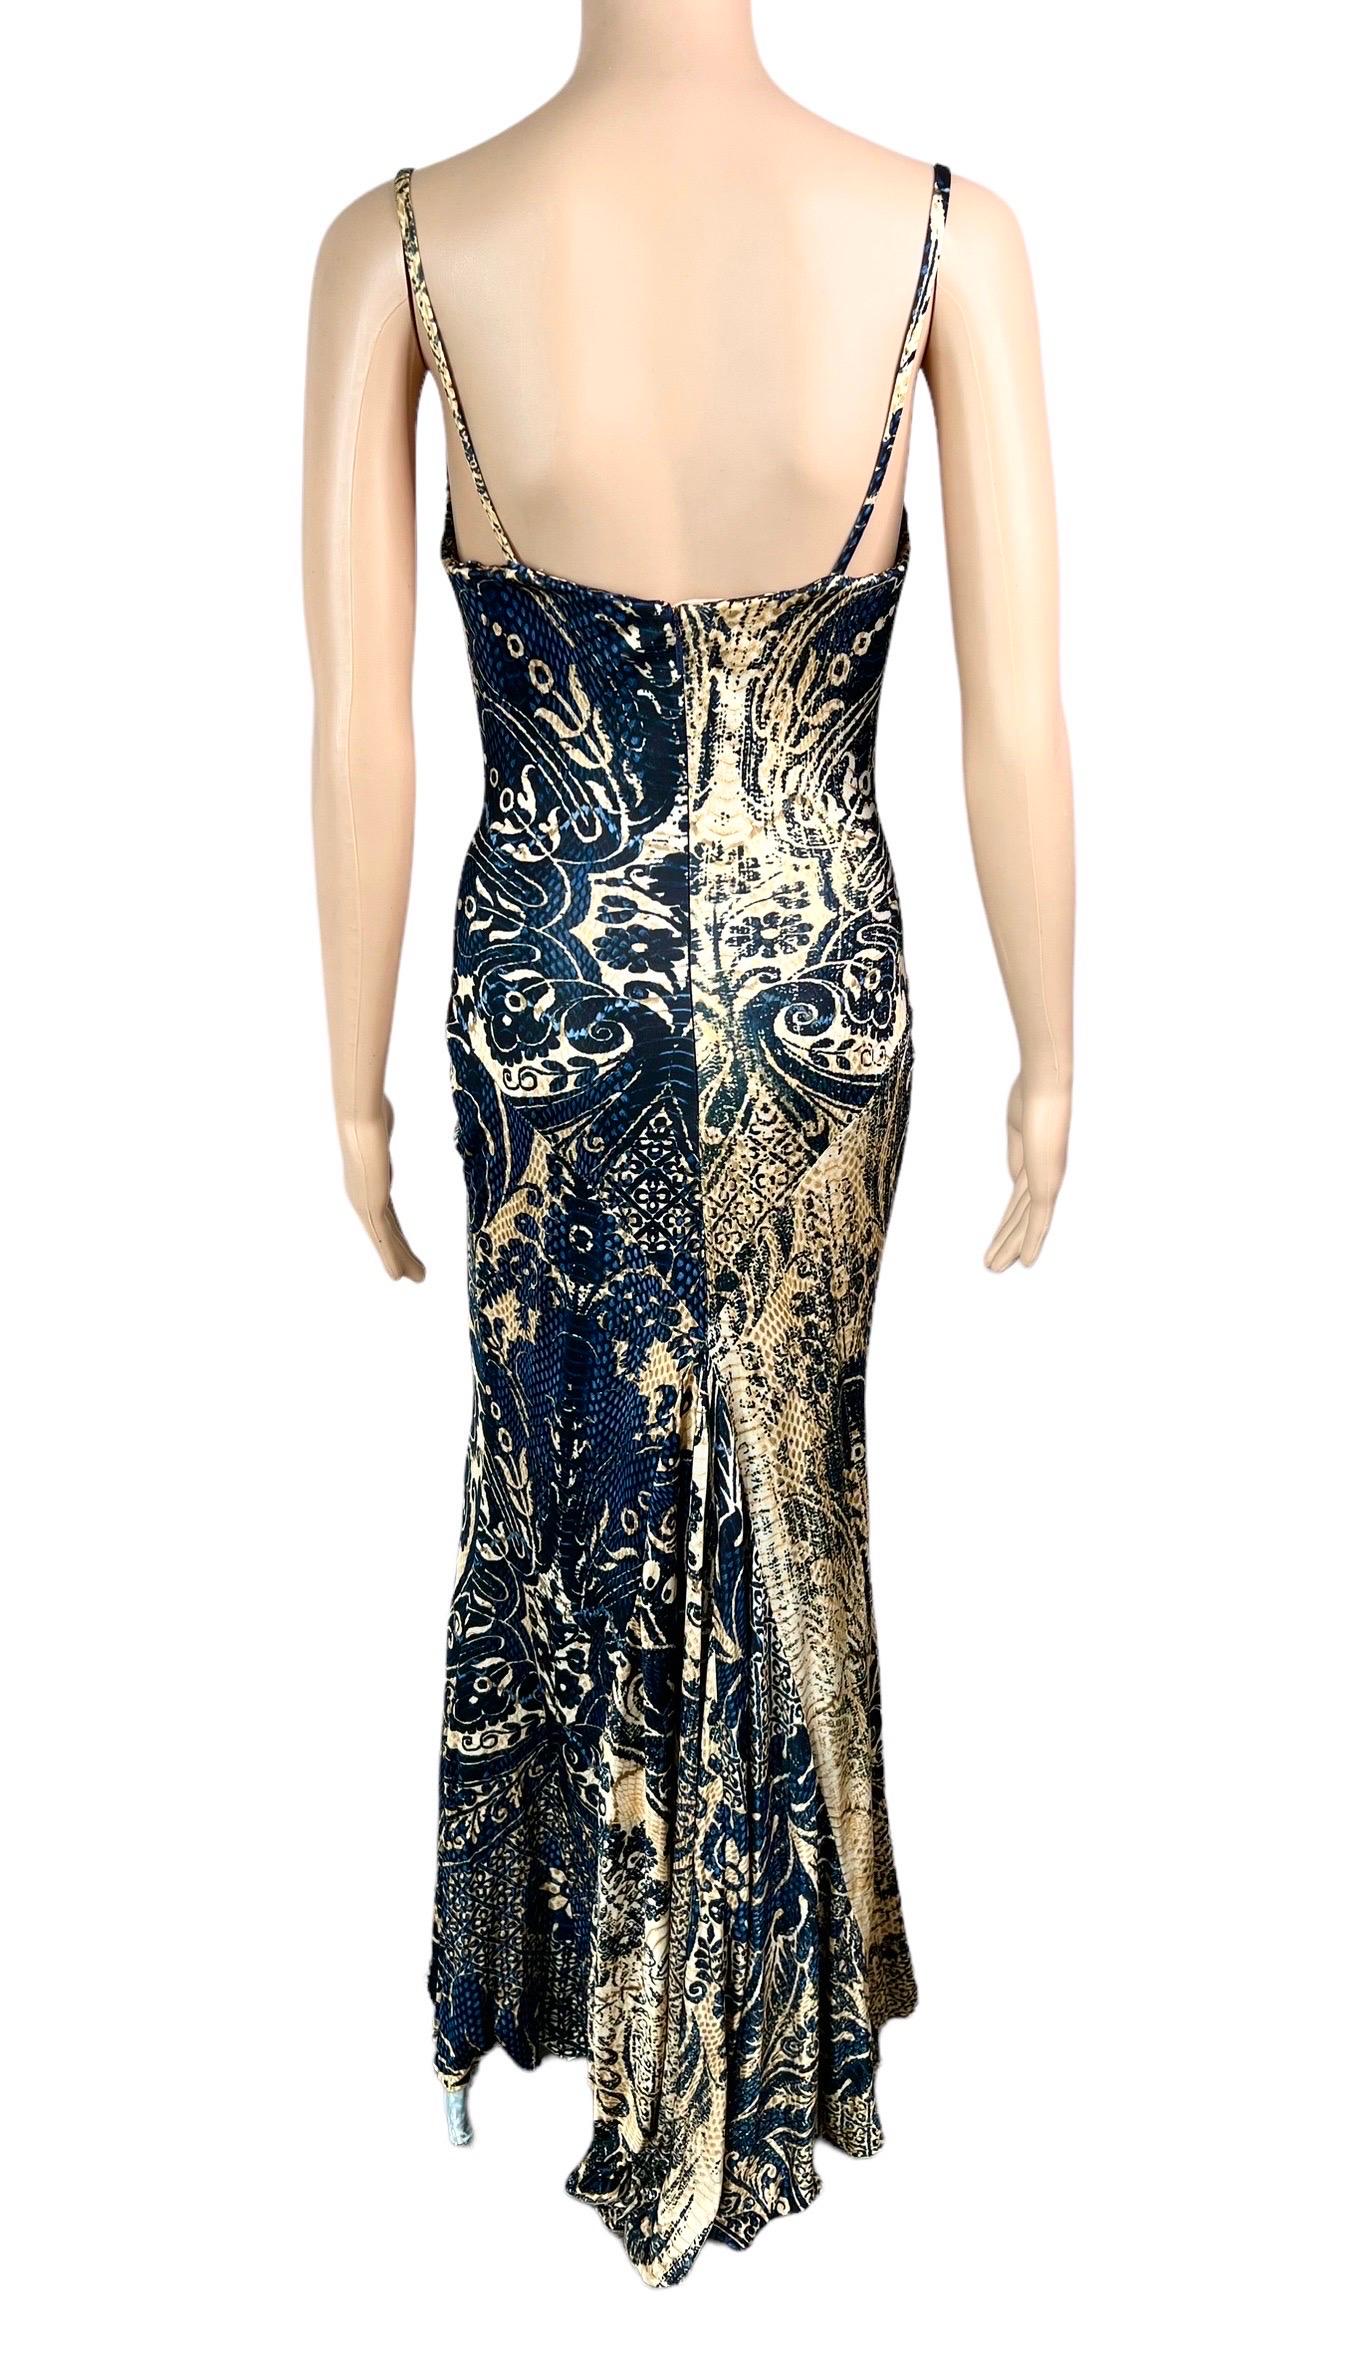 Black Roberto Cavalli c.2005 Bustier Bra Abstract Print Maxi Evening Dress Gown For Sale